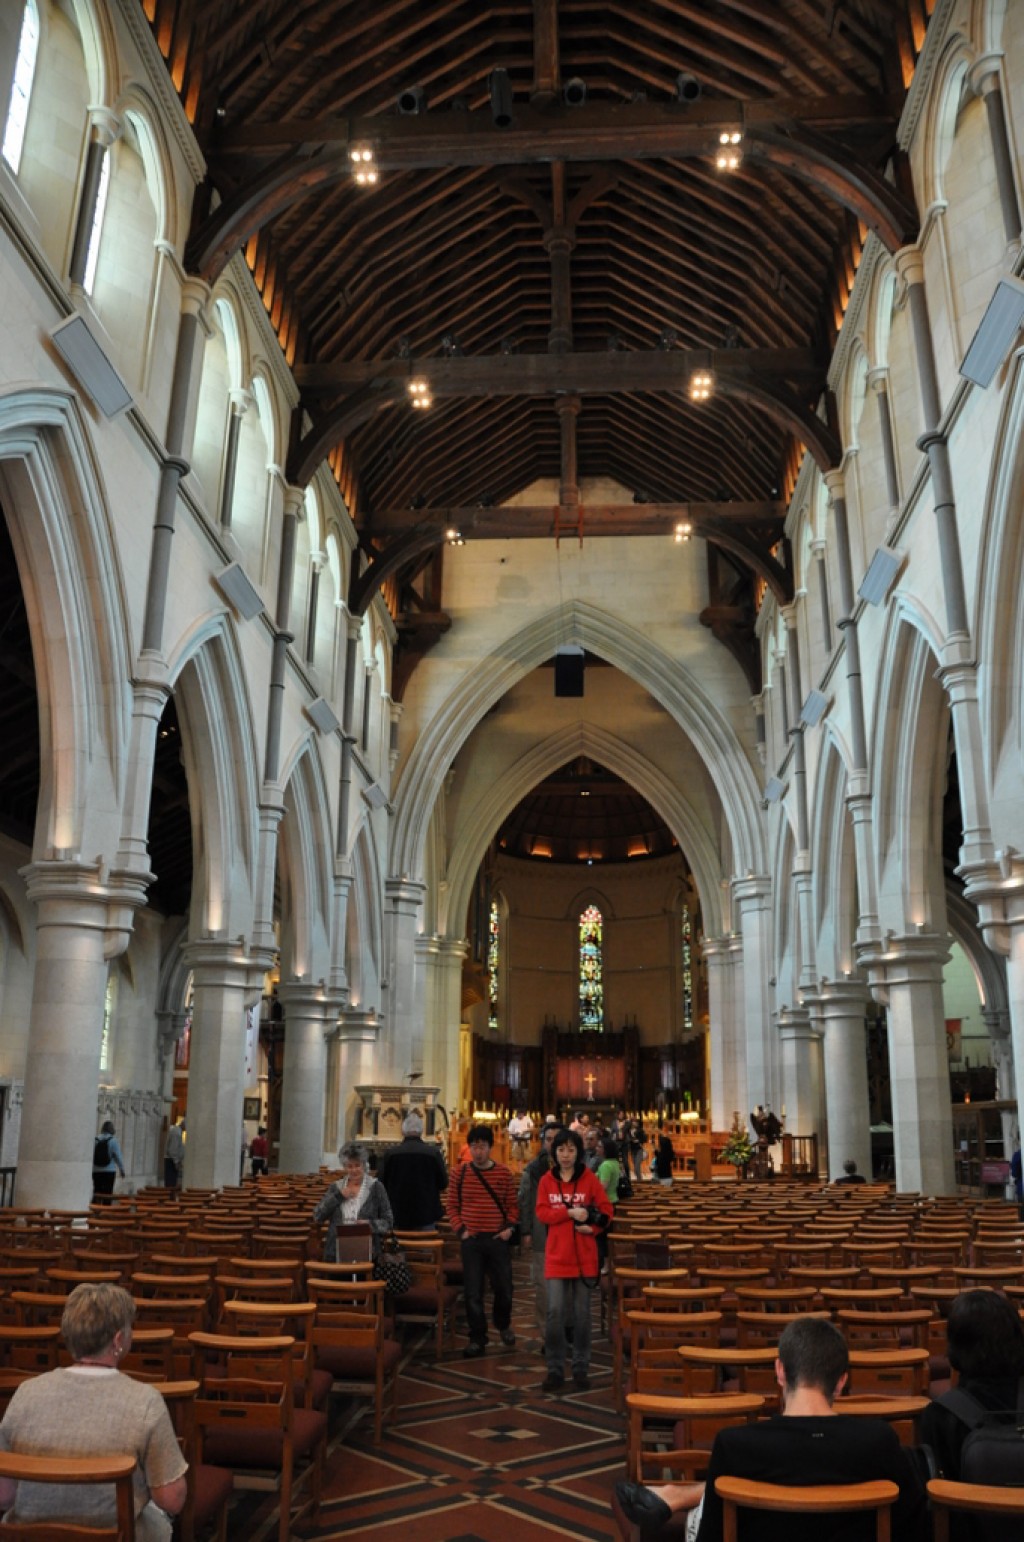 Pictures of New Zealand: Inside the beautiful Christchurch Cathedral.